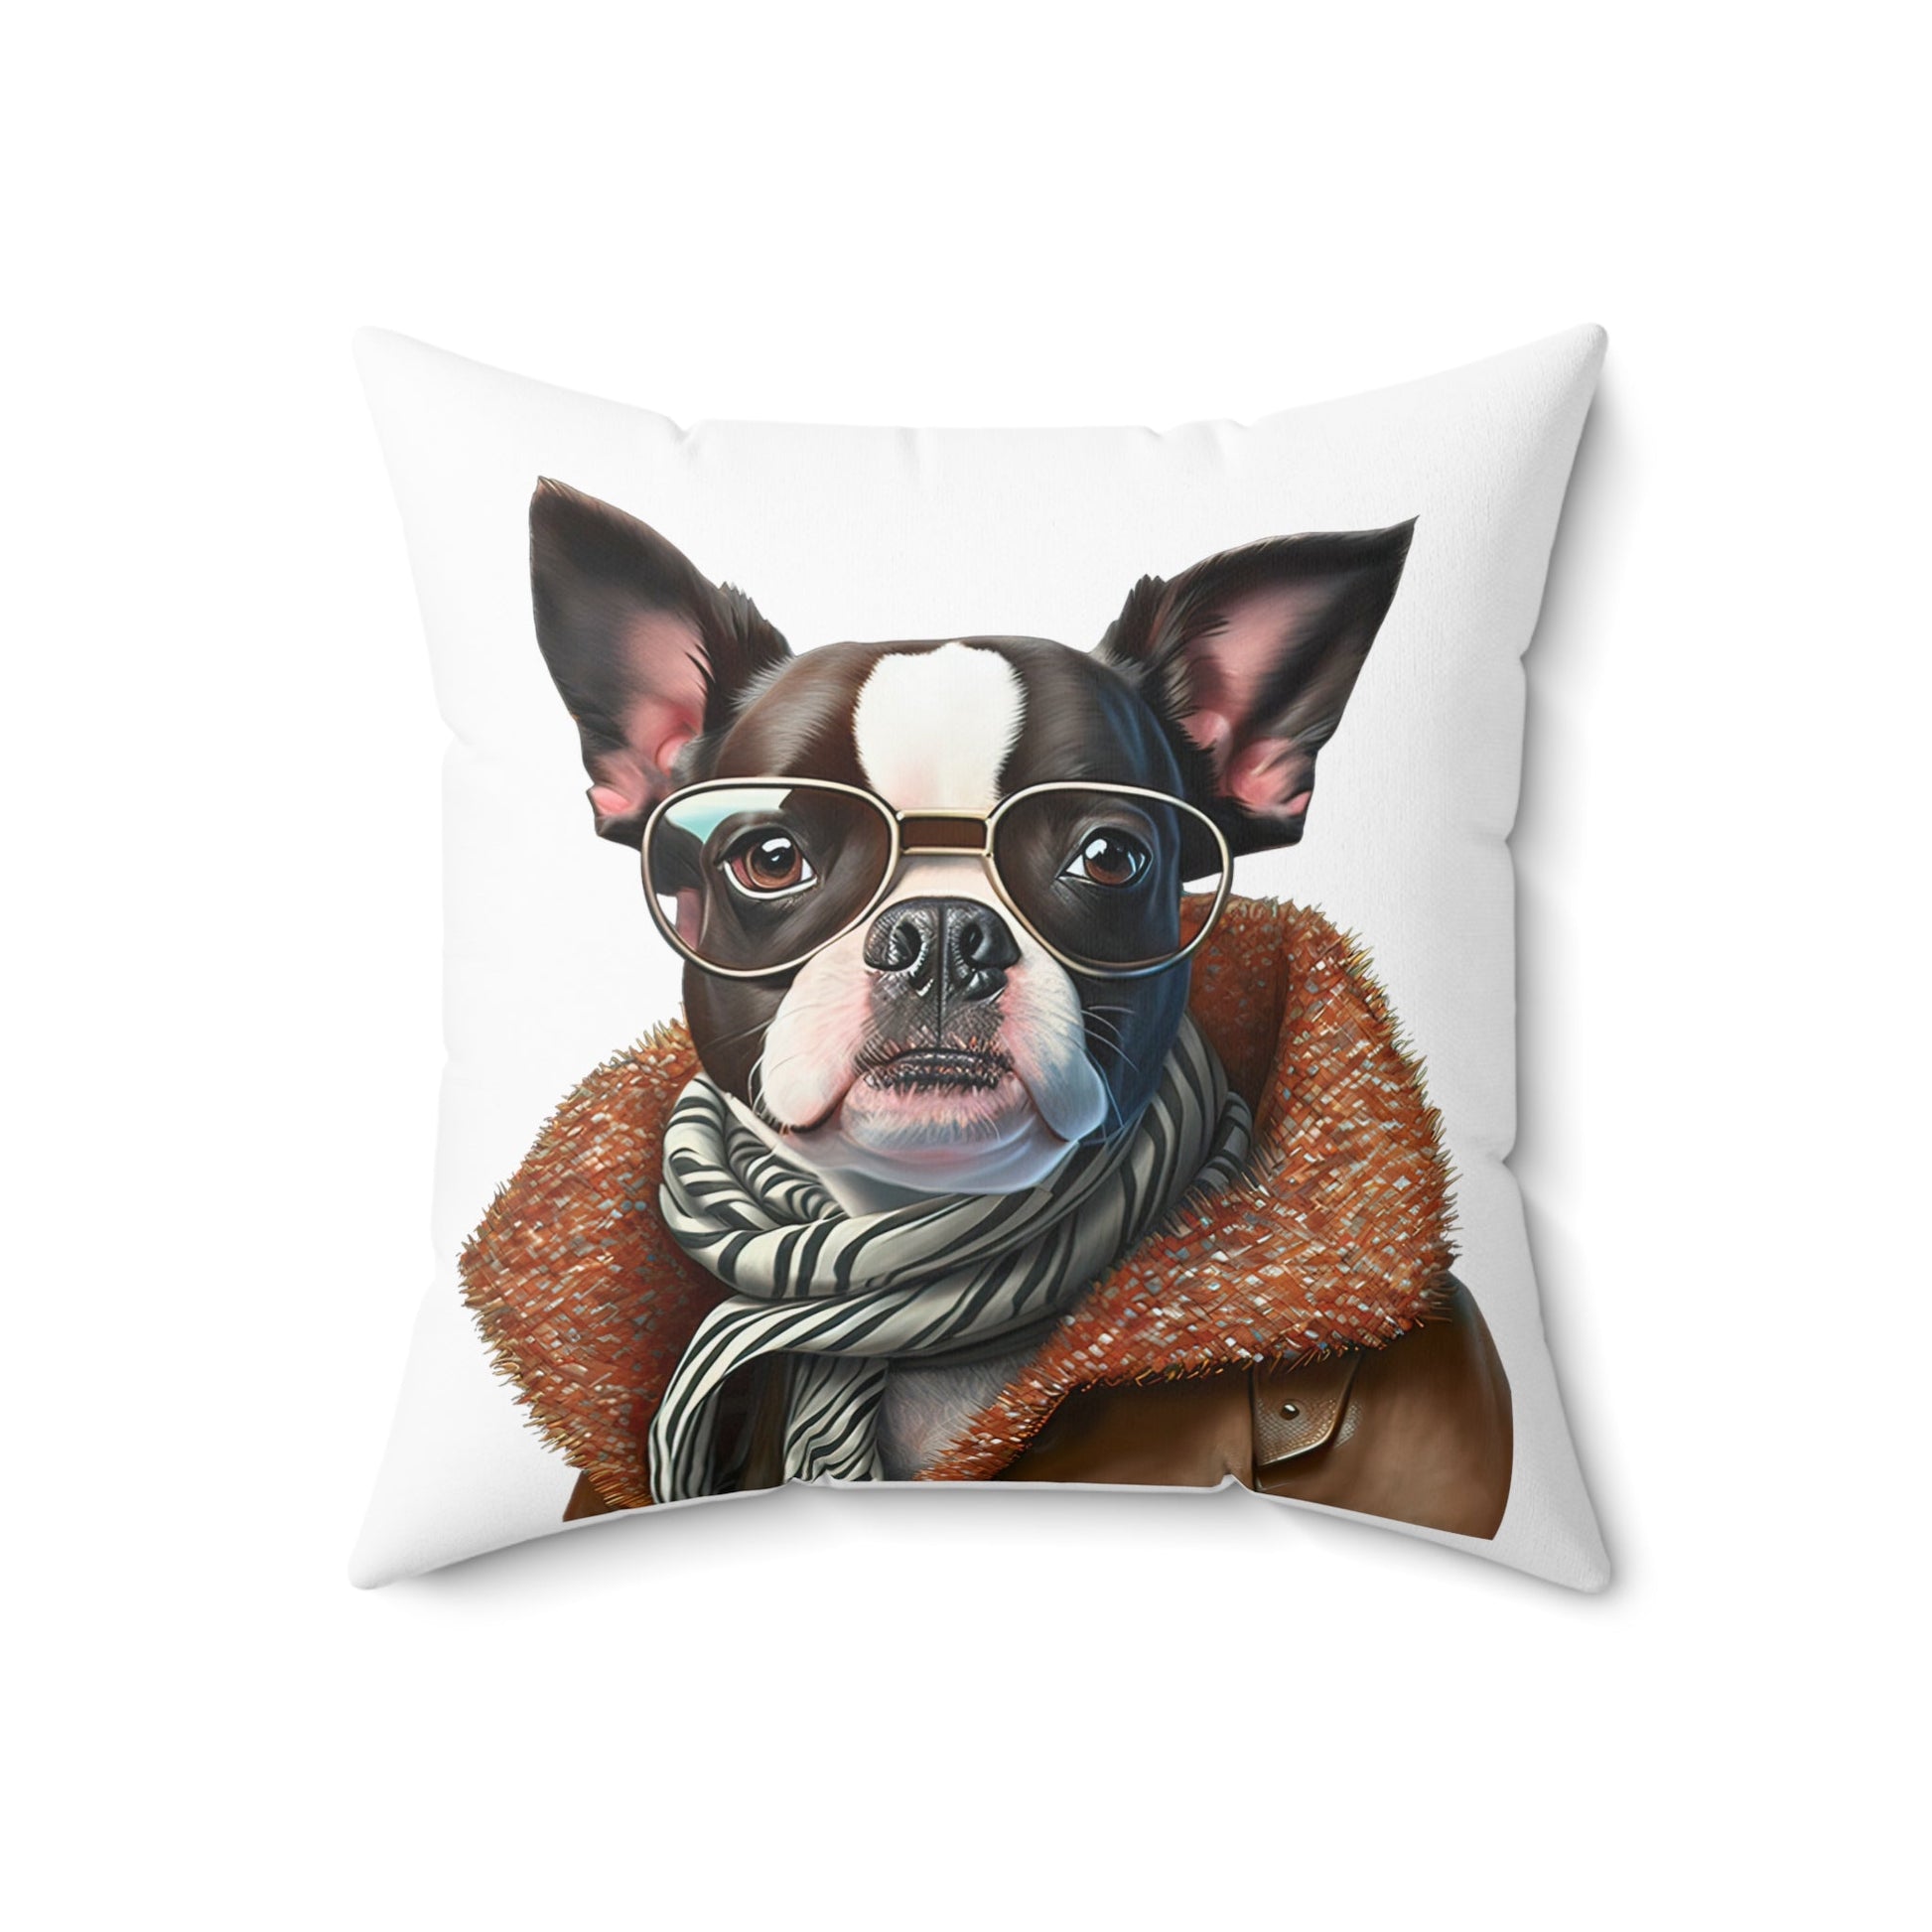 BENNY : Spun Polyester Square Pillow - Shaggy Chic